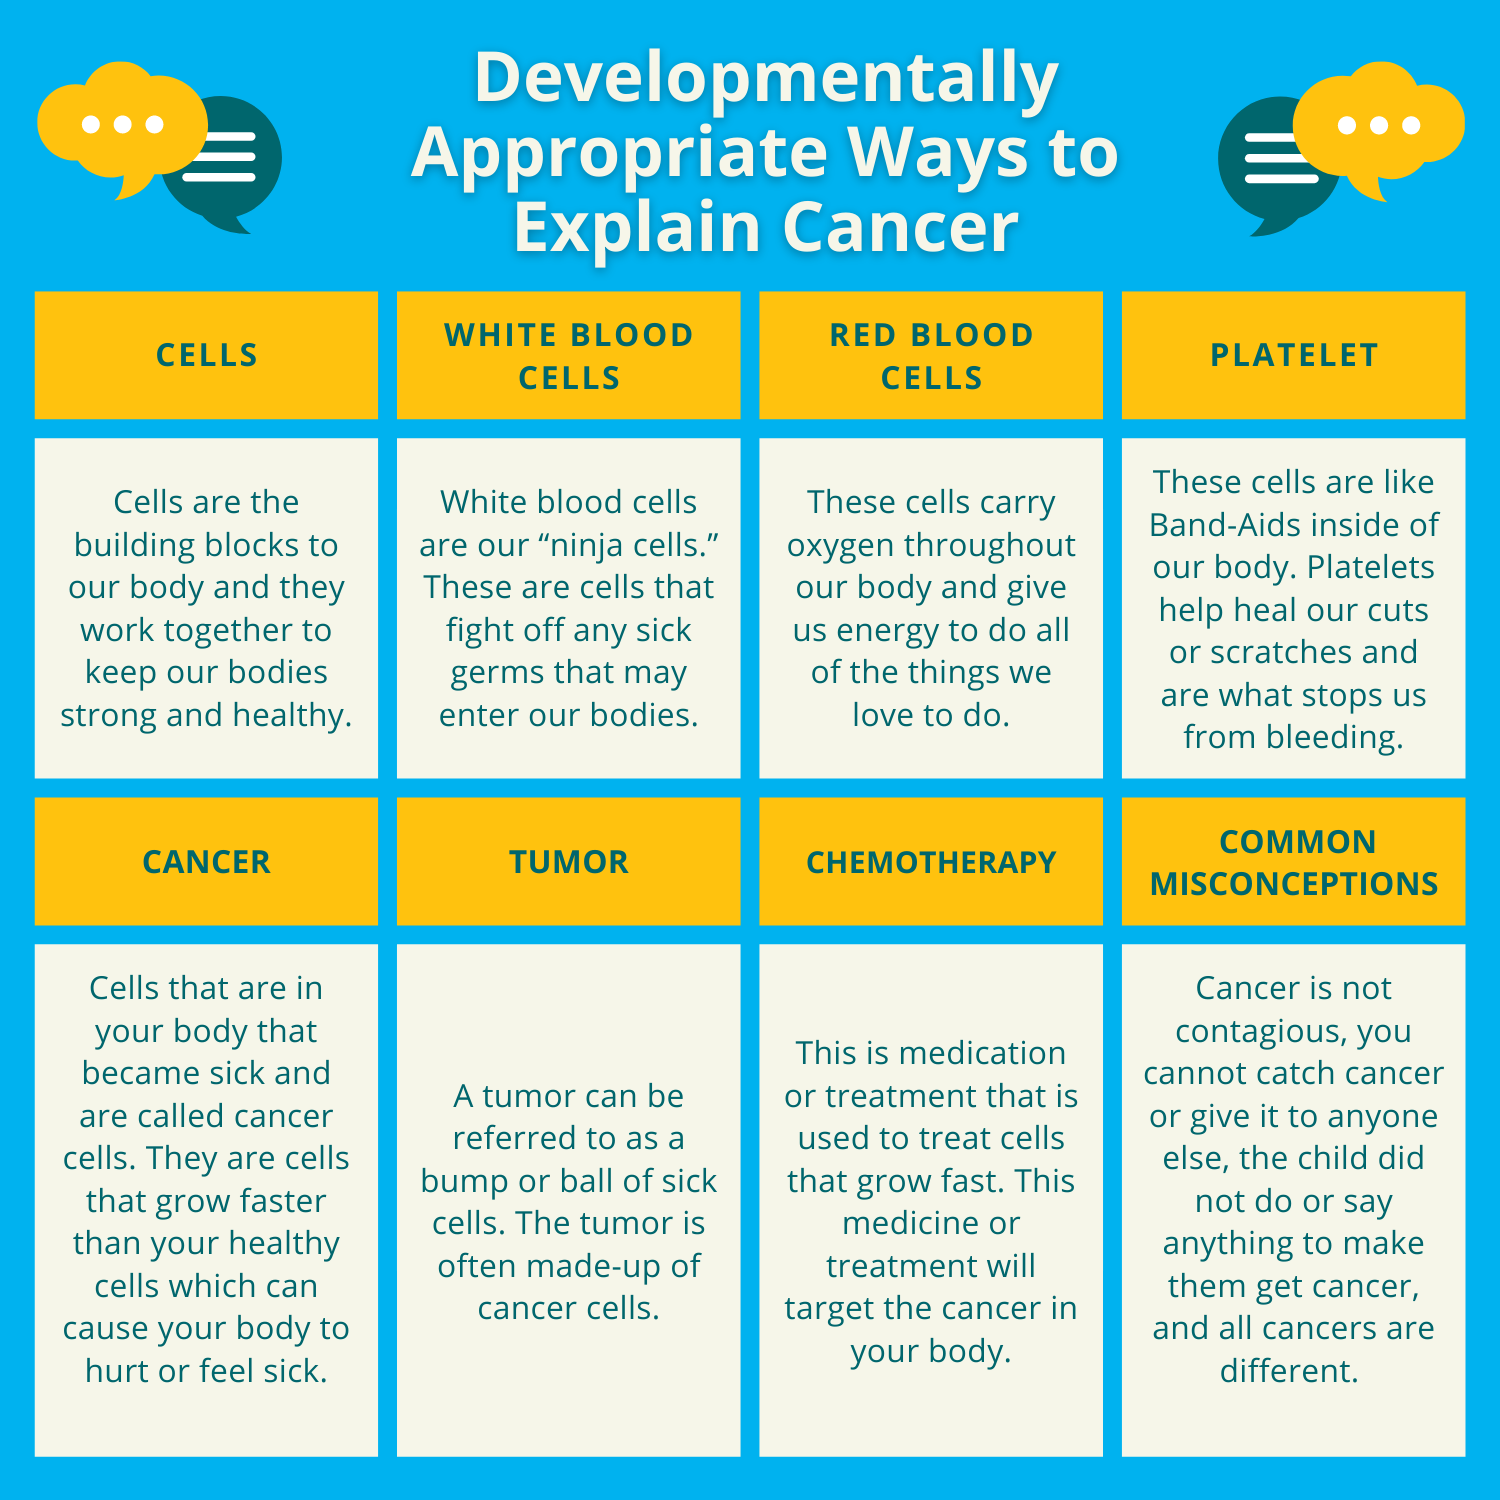 Explaining Cancer in a Developmentally Appropriate Way (600 × 600 px)